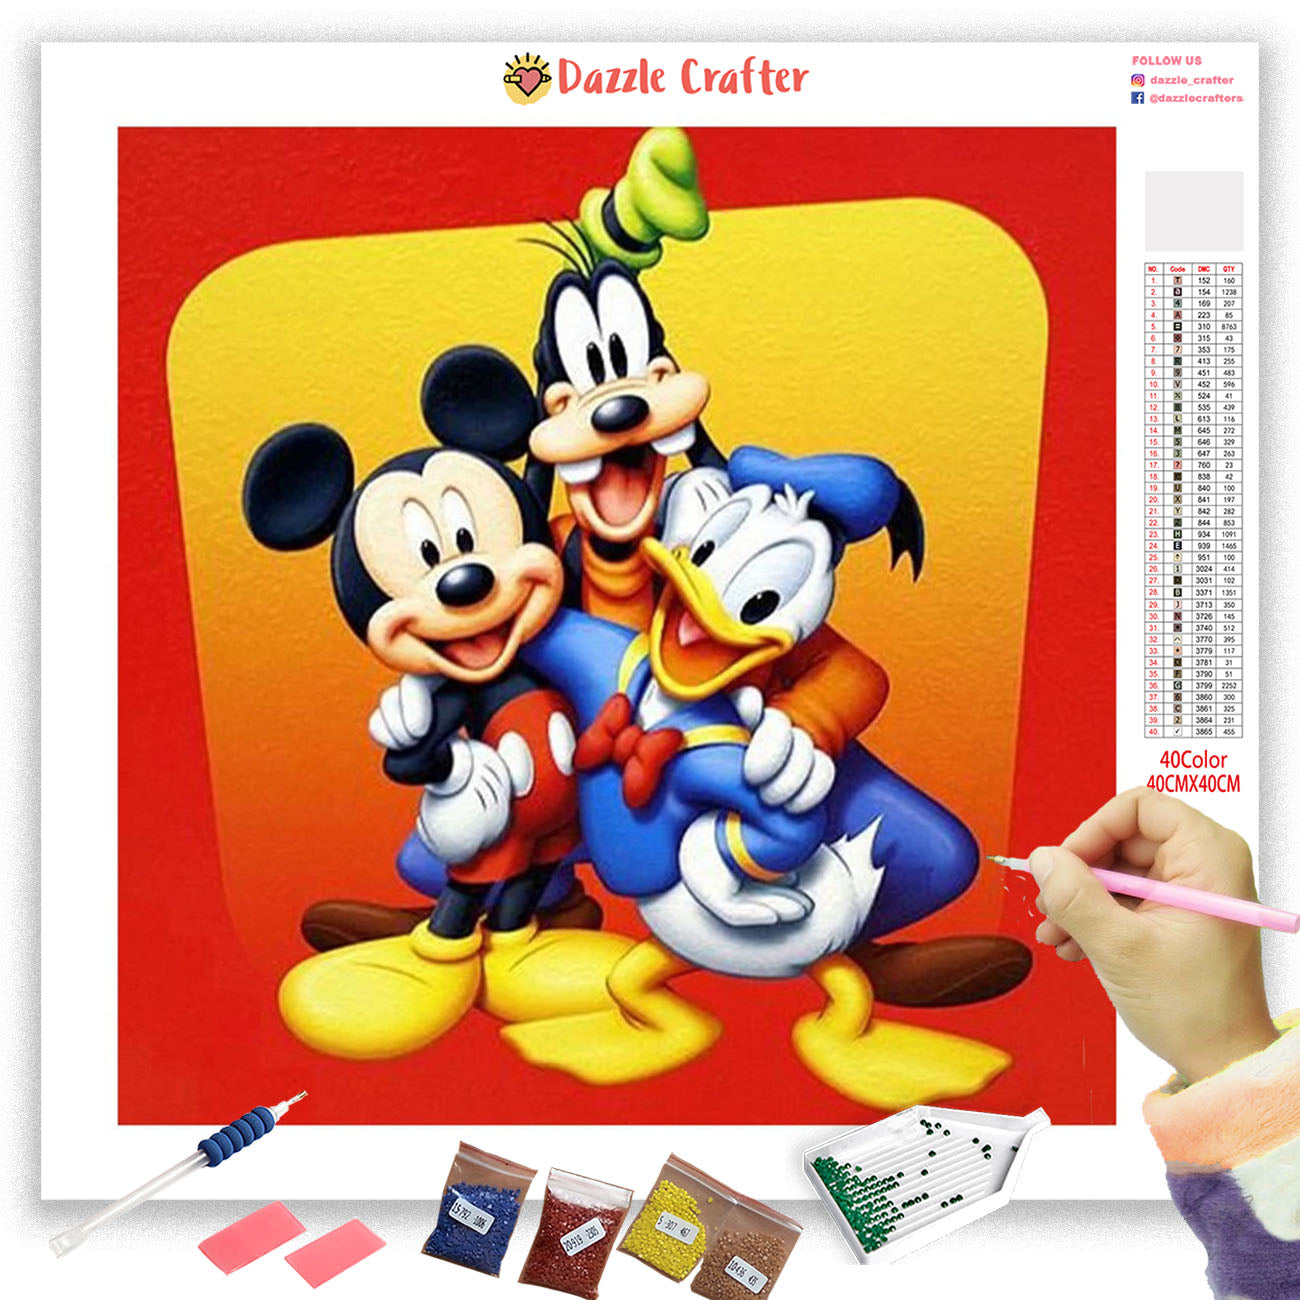 MICKEY AND FRIENDS Diamond Painting Kit – DAZZLE CRAFTER